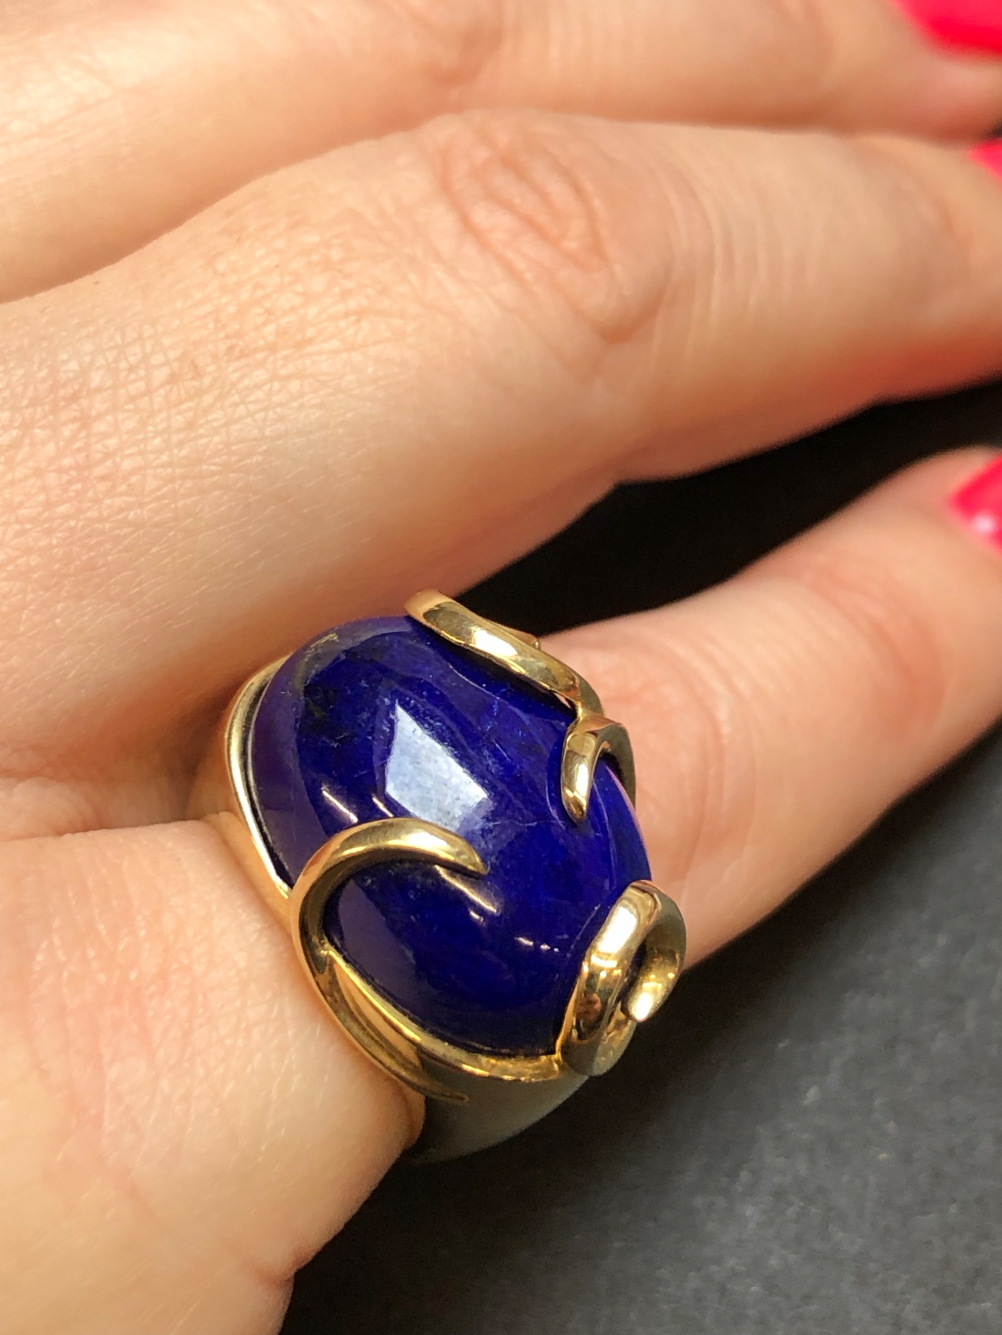 A CONTEMPORARY LAPIS LAZULI AND 9ct HALLMARKED GOLD RING. FINGER SIZE K. WEIGHT 8.73grms. - Image 8 of 8